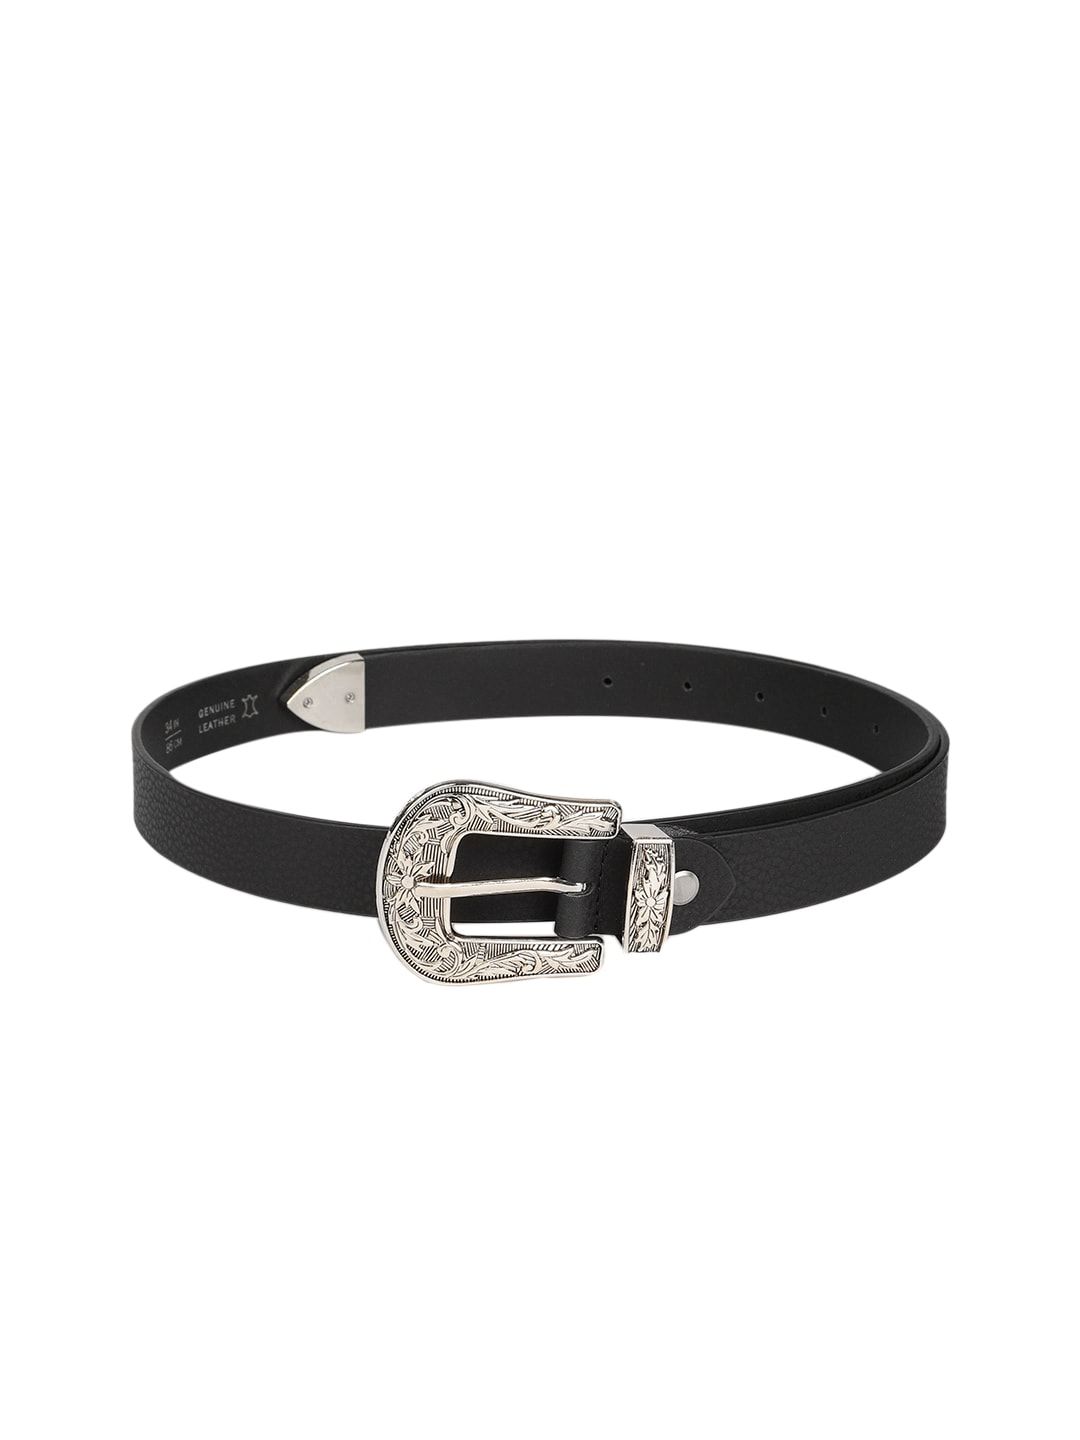 Mast & Harbour Women Black Solid Leather Belt Price in India